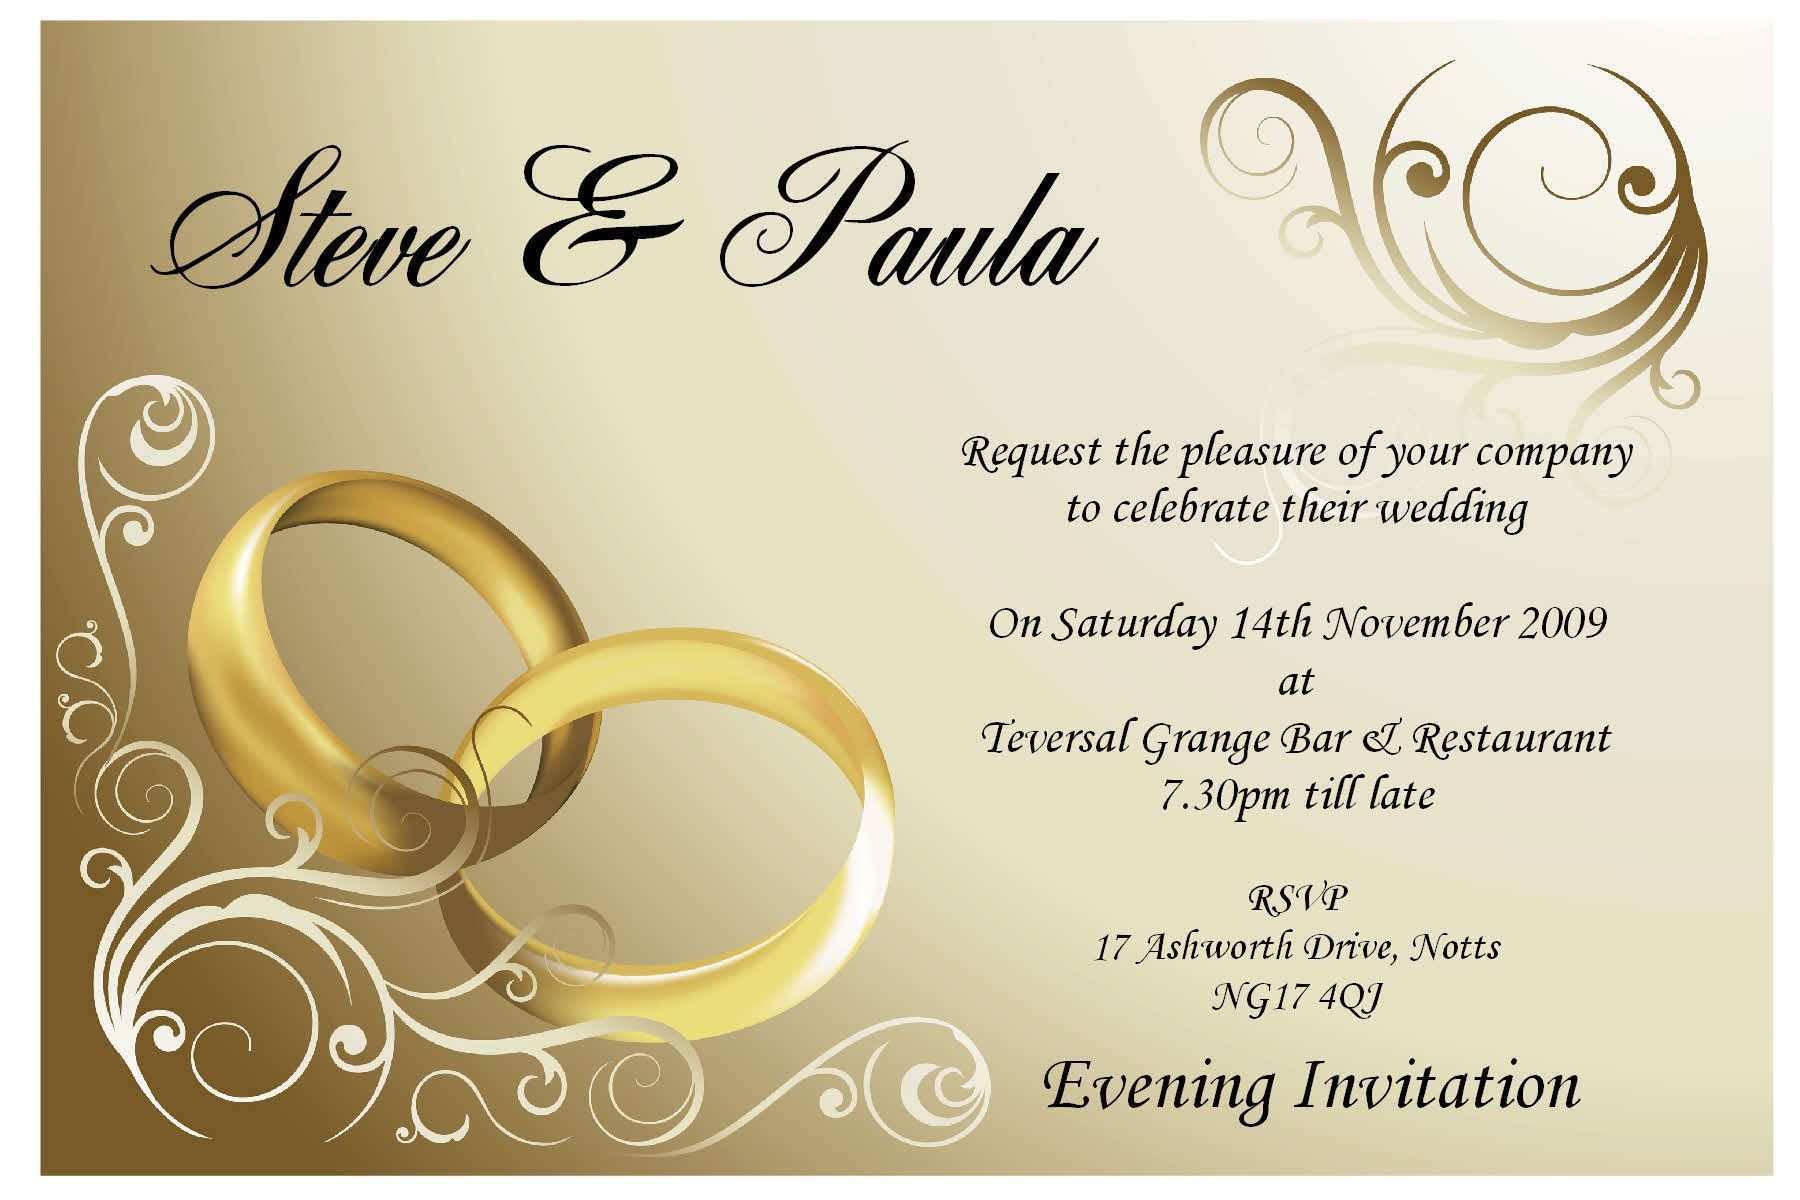 Standard Wedding Invitation Card Templates Online In Photoshop For